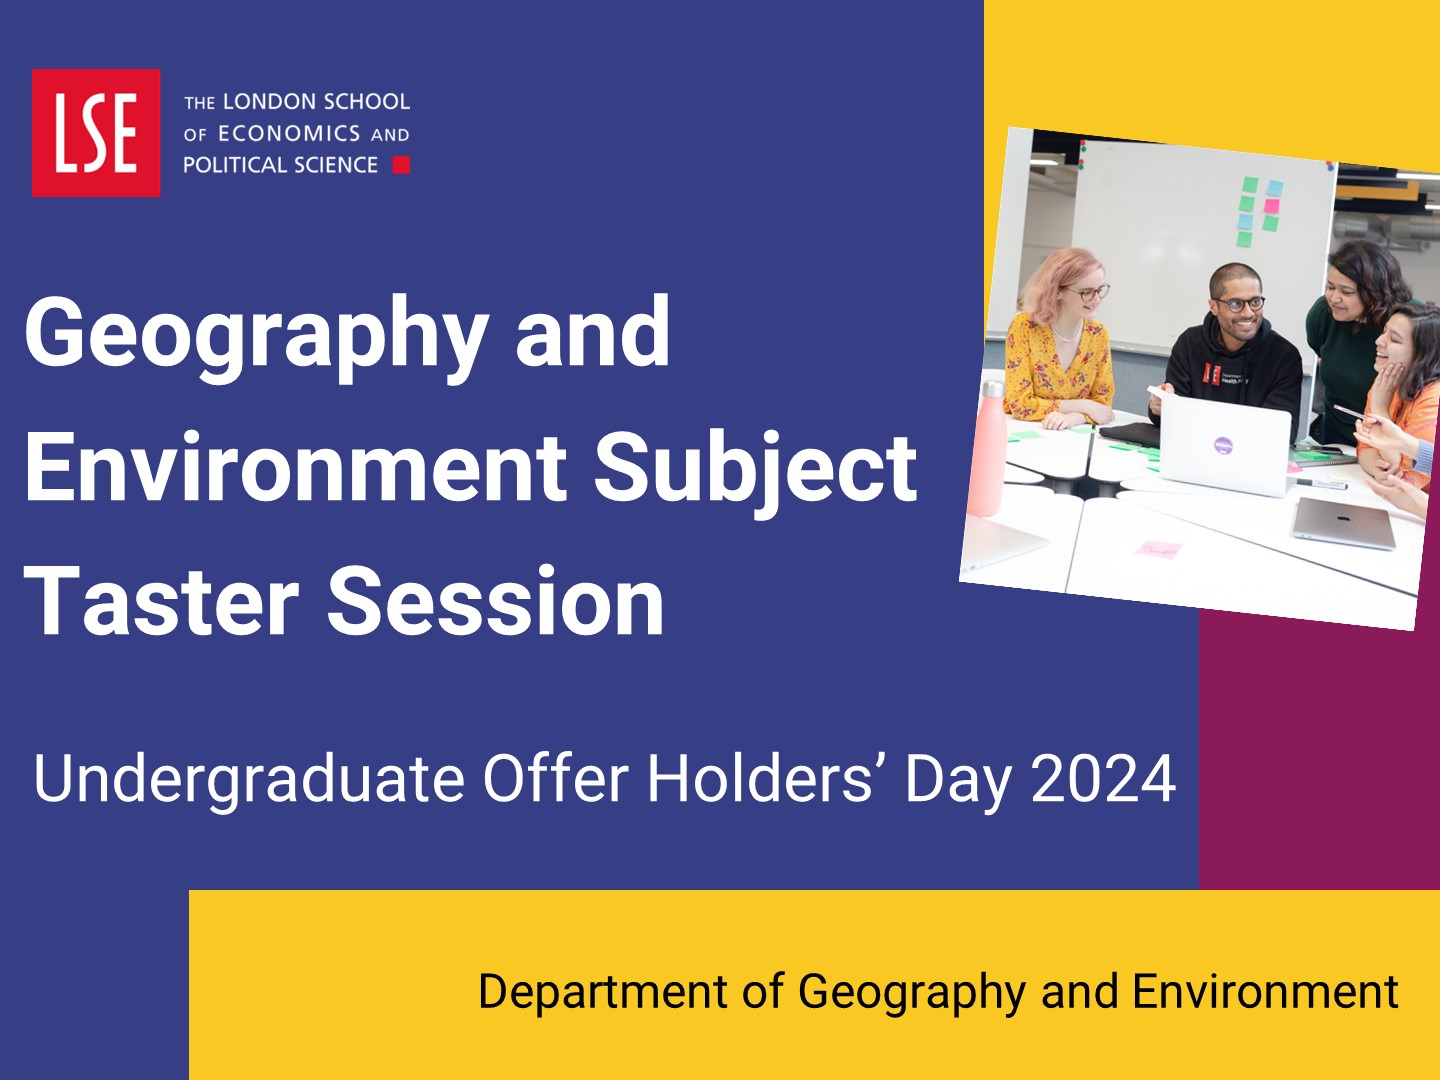 Watch the geography and environment subject taster session